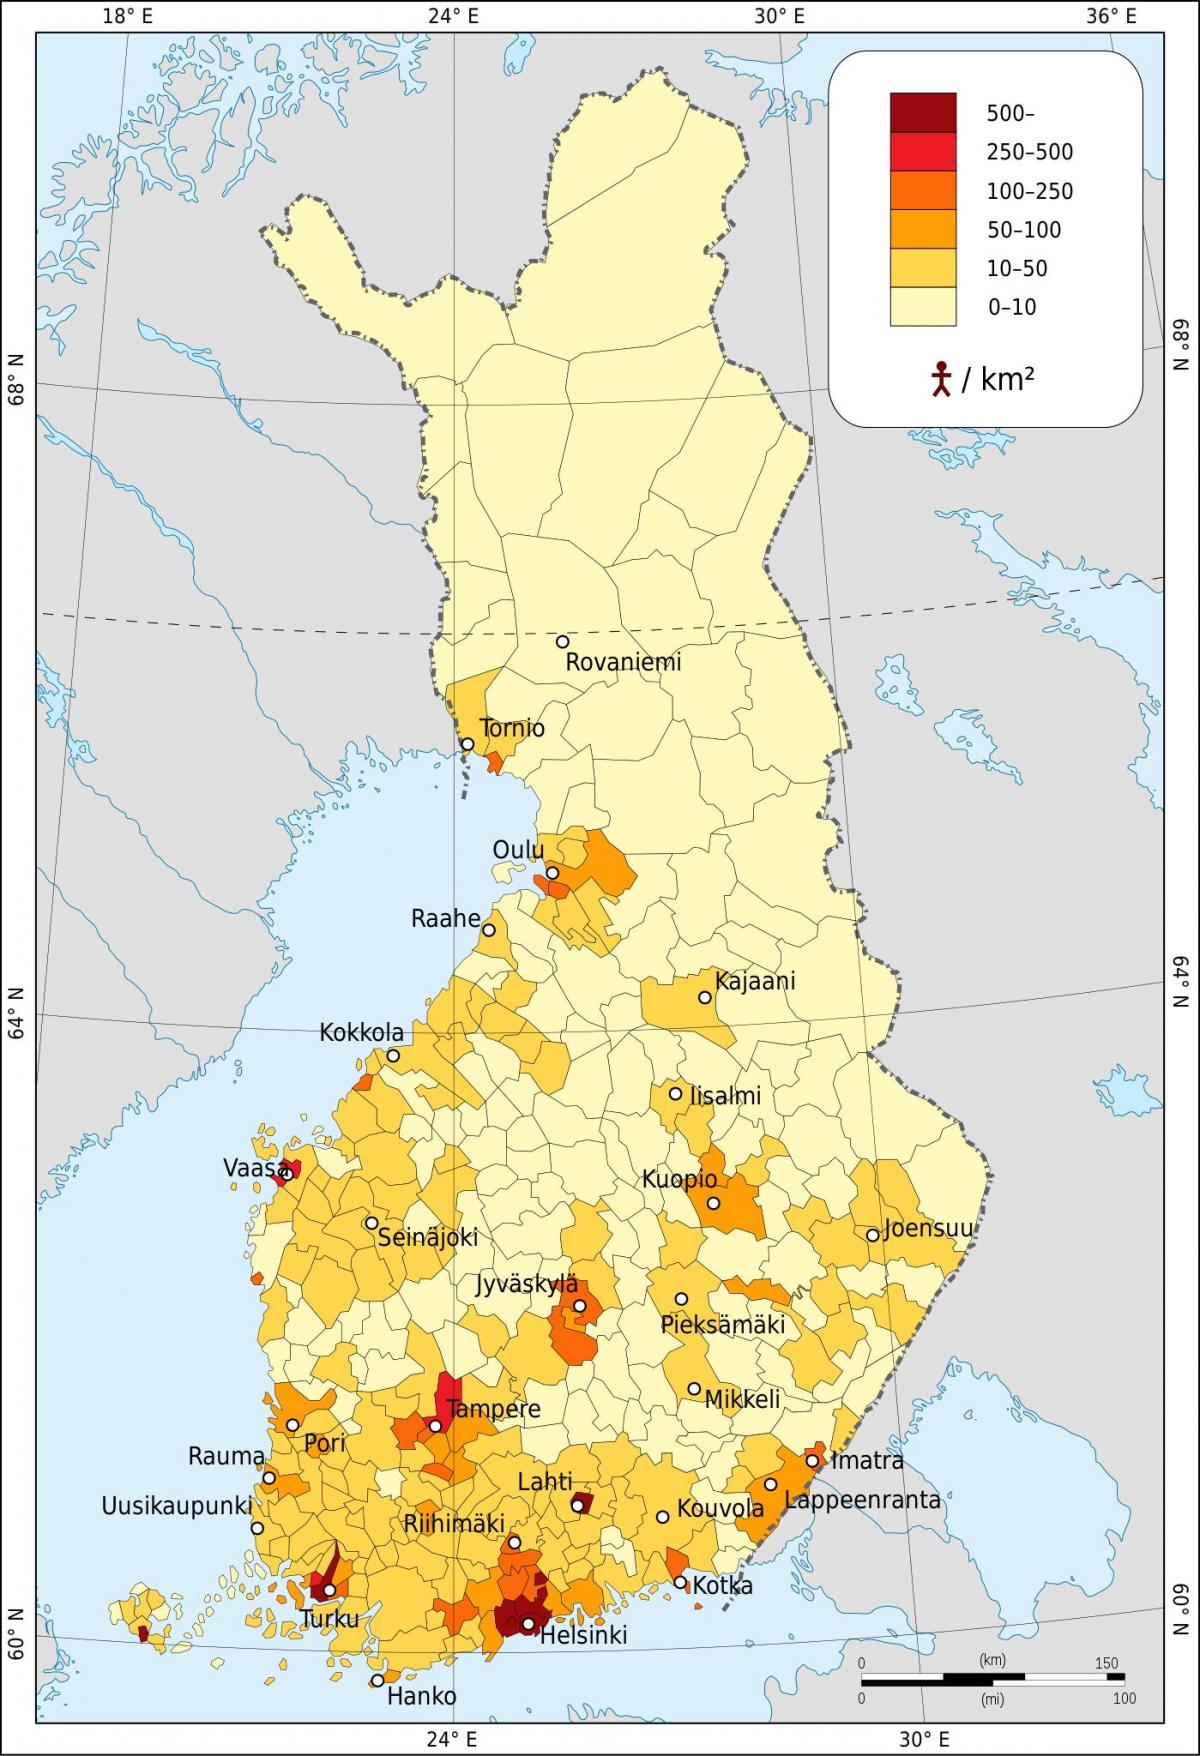 Map of Finland population population density and structure of